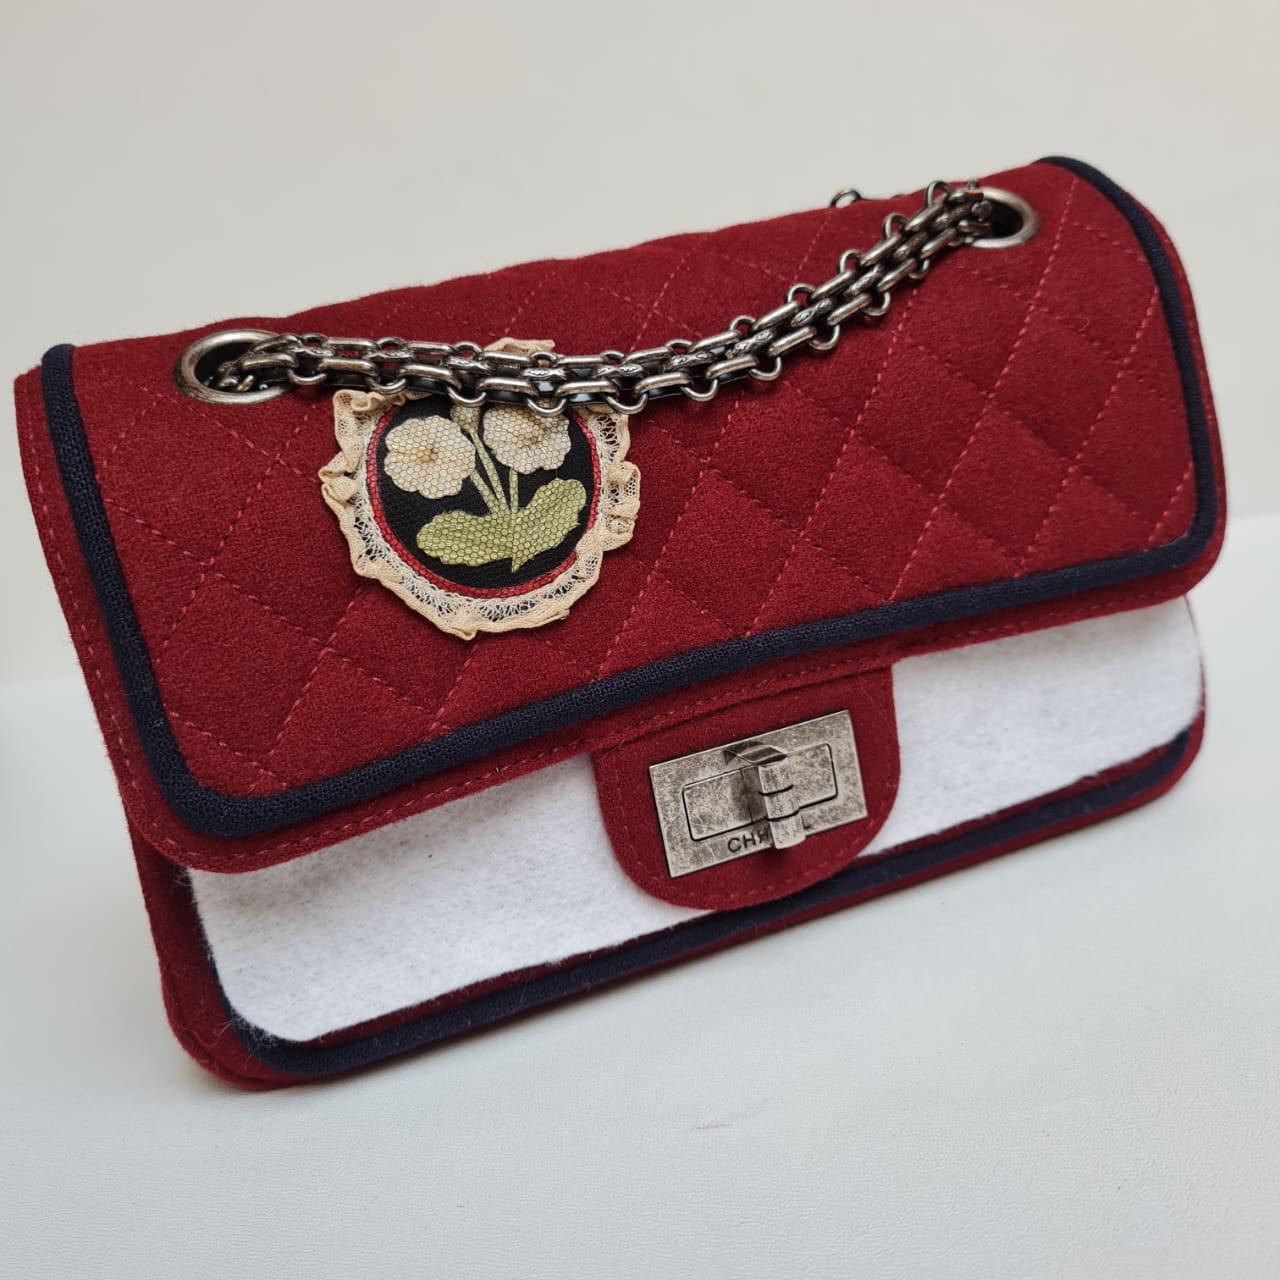 Chanel 2015 Red Edelweiss Reissue Wool Flap Bag For Sale 15